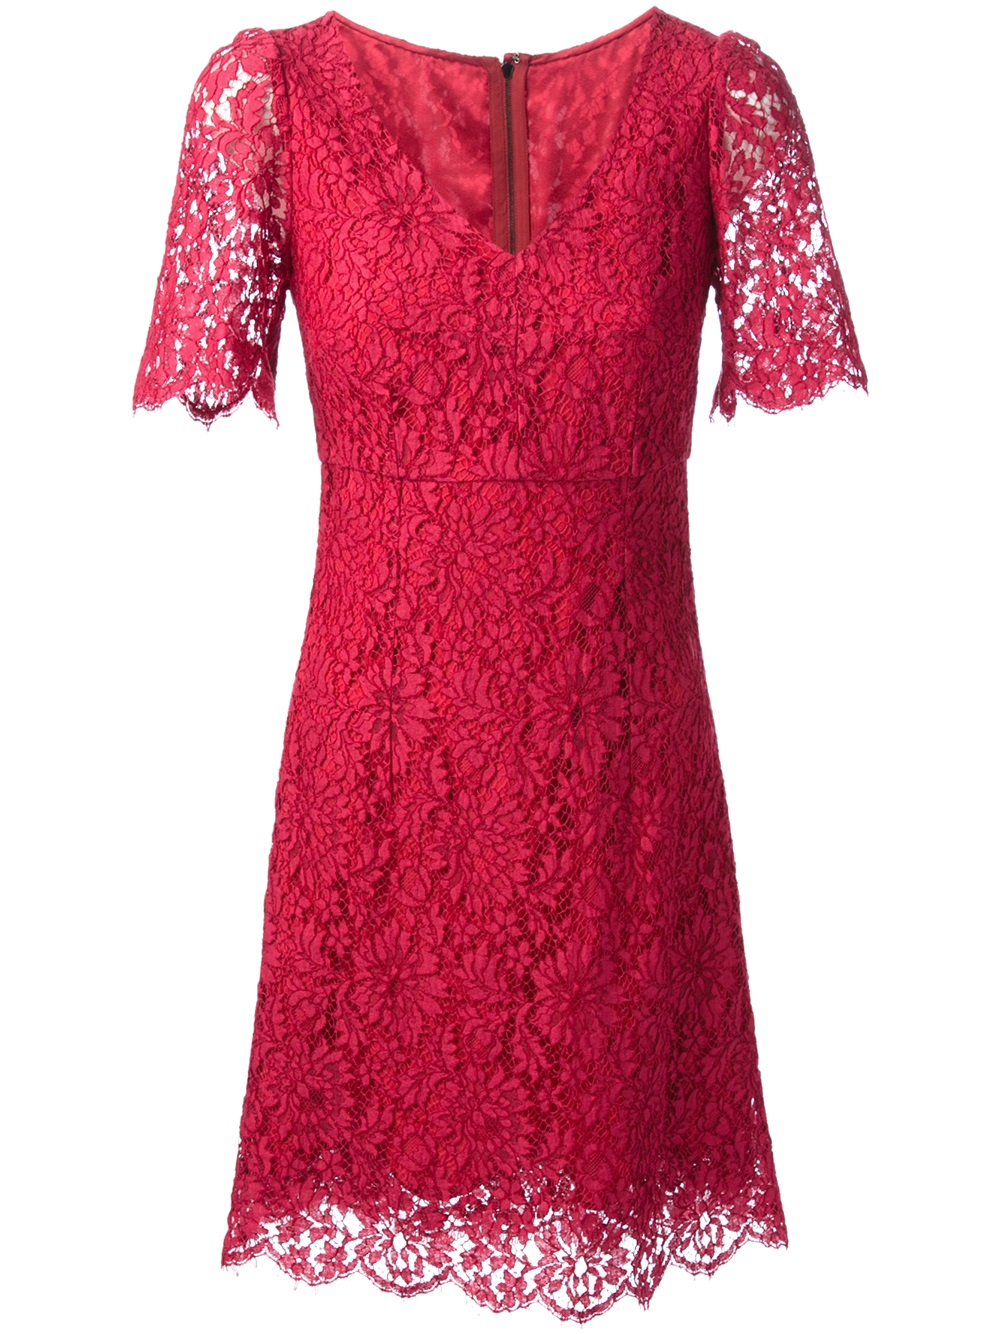 Lyst - Dolce & Gabbana Lace Dress in Red